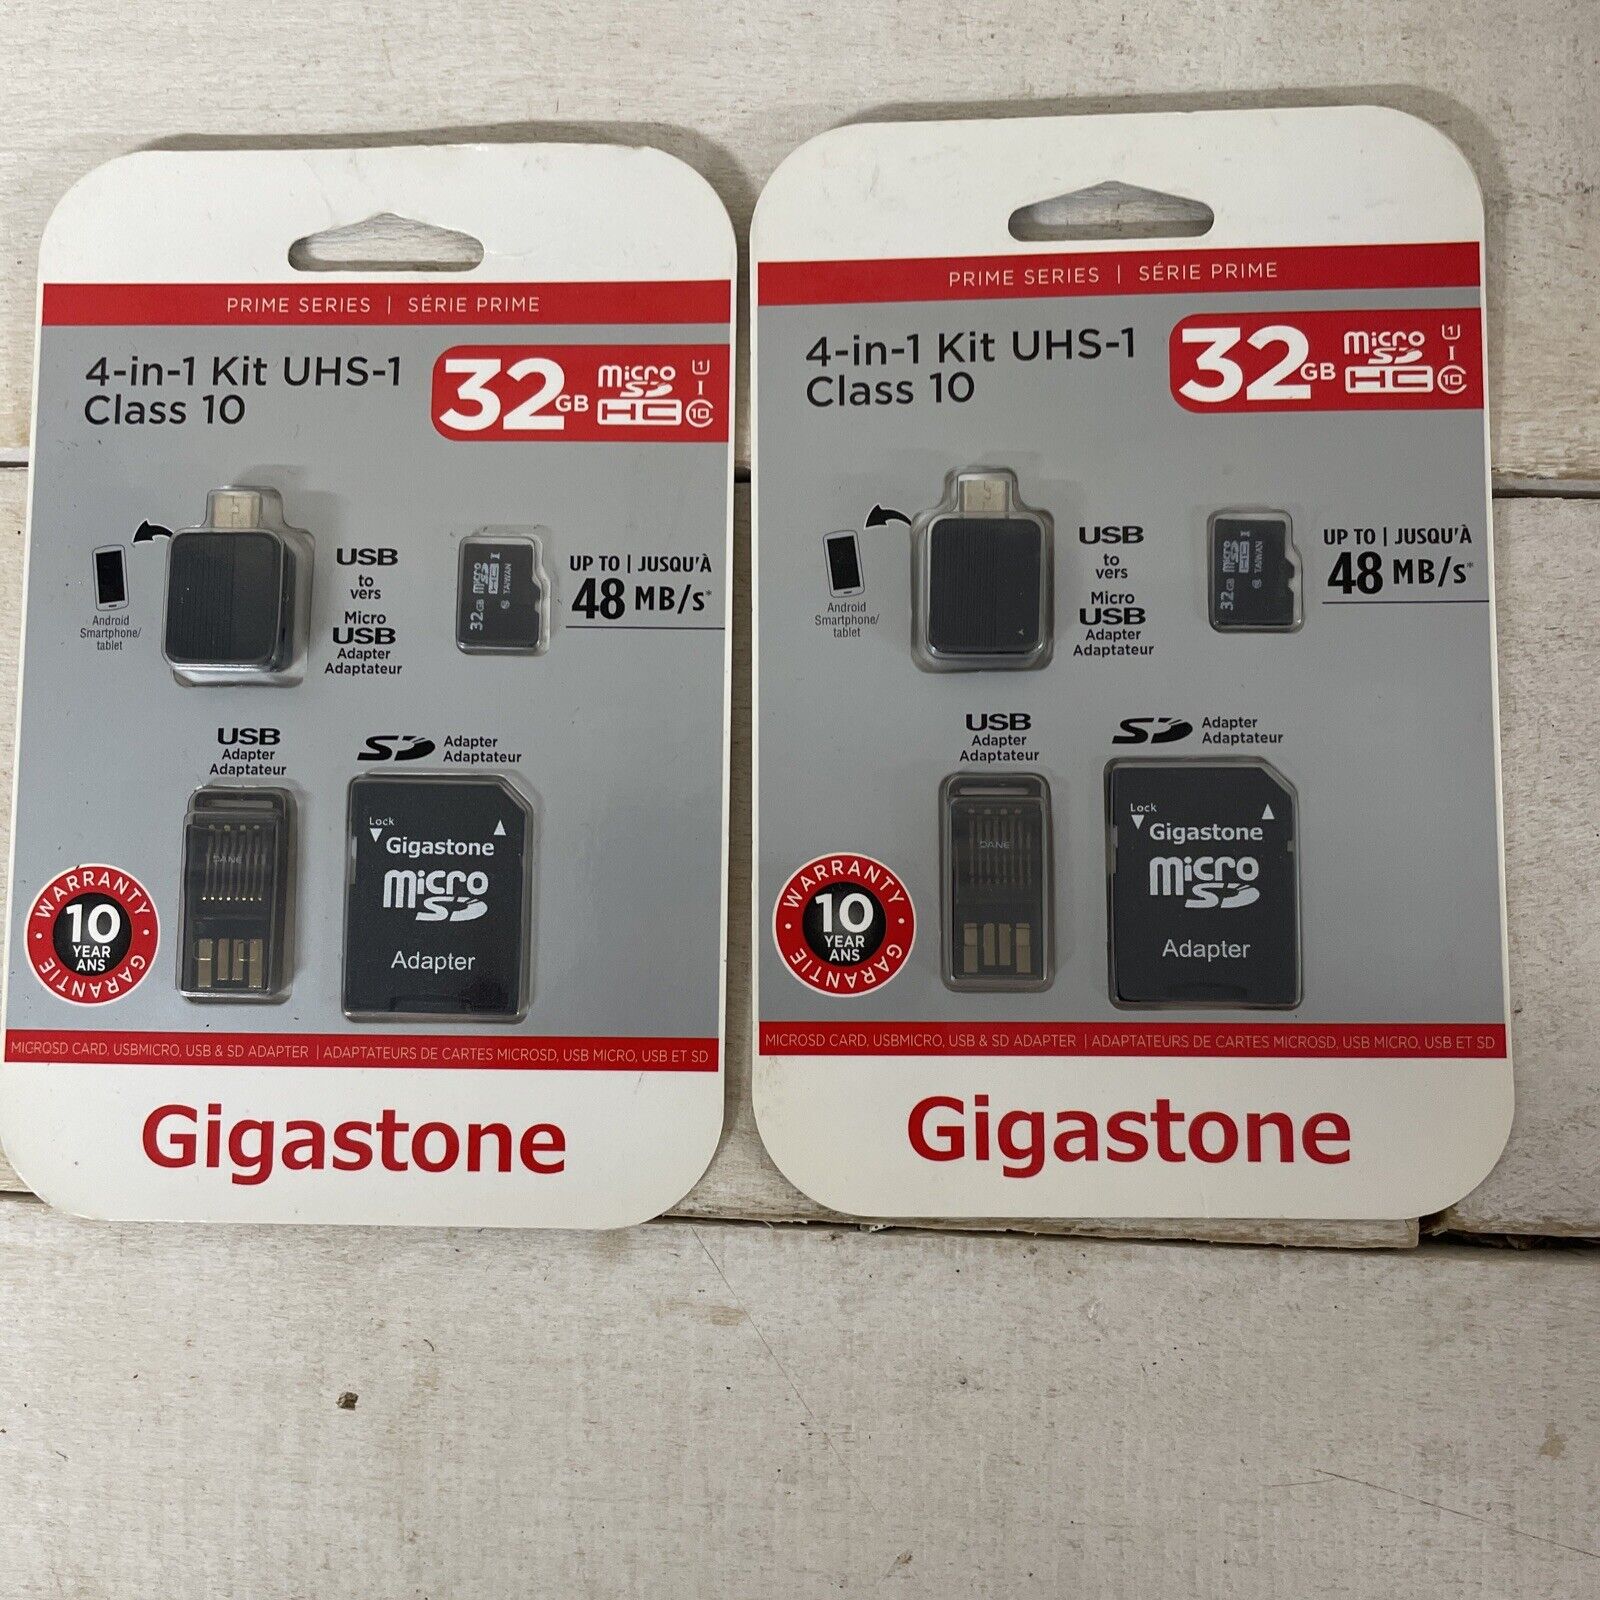 2- GigaStone 4-in-1 Kit 32GB  Class 10 UHS-1 Fast Shipping